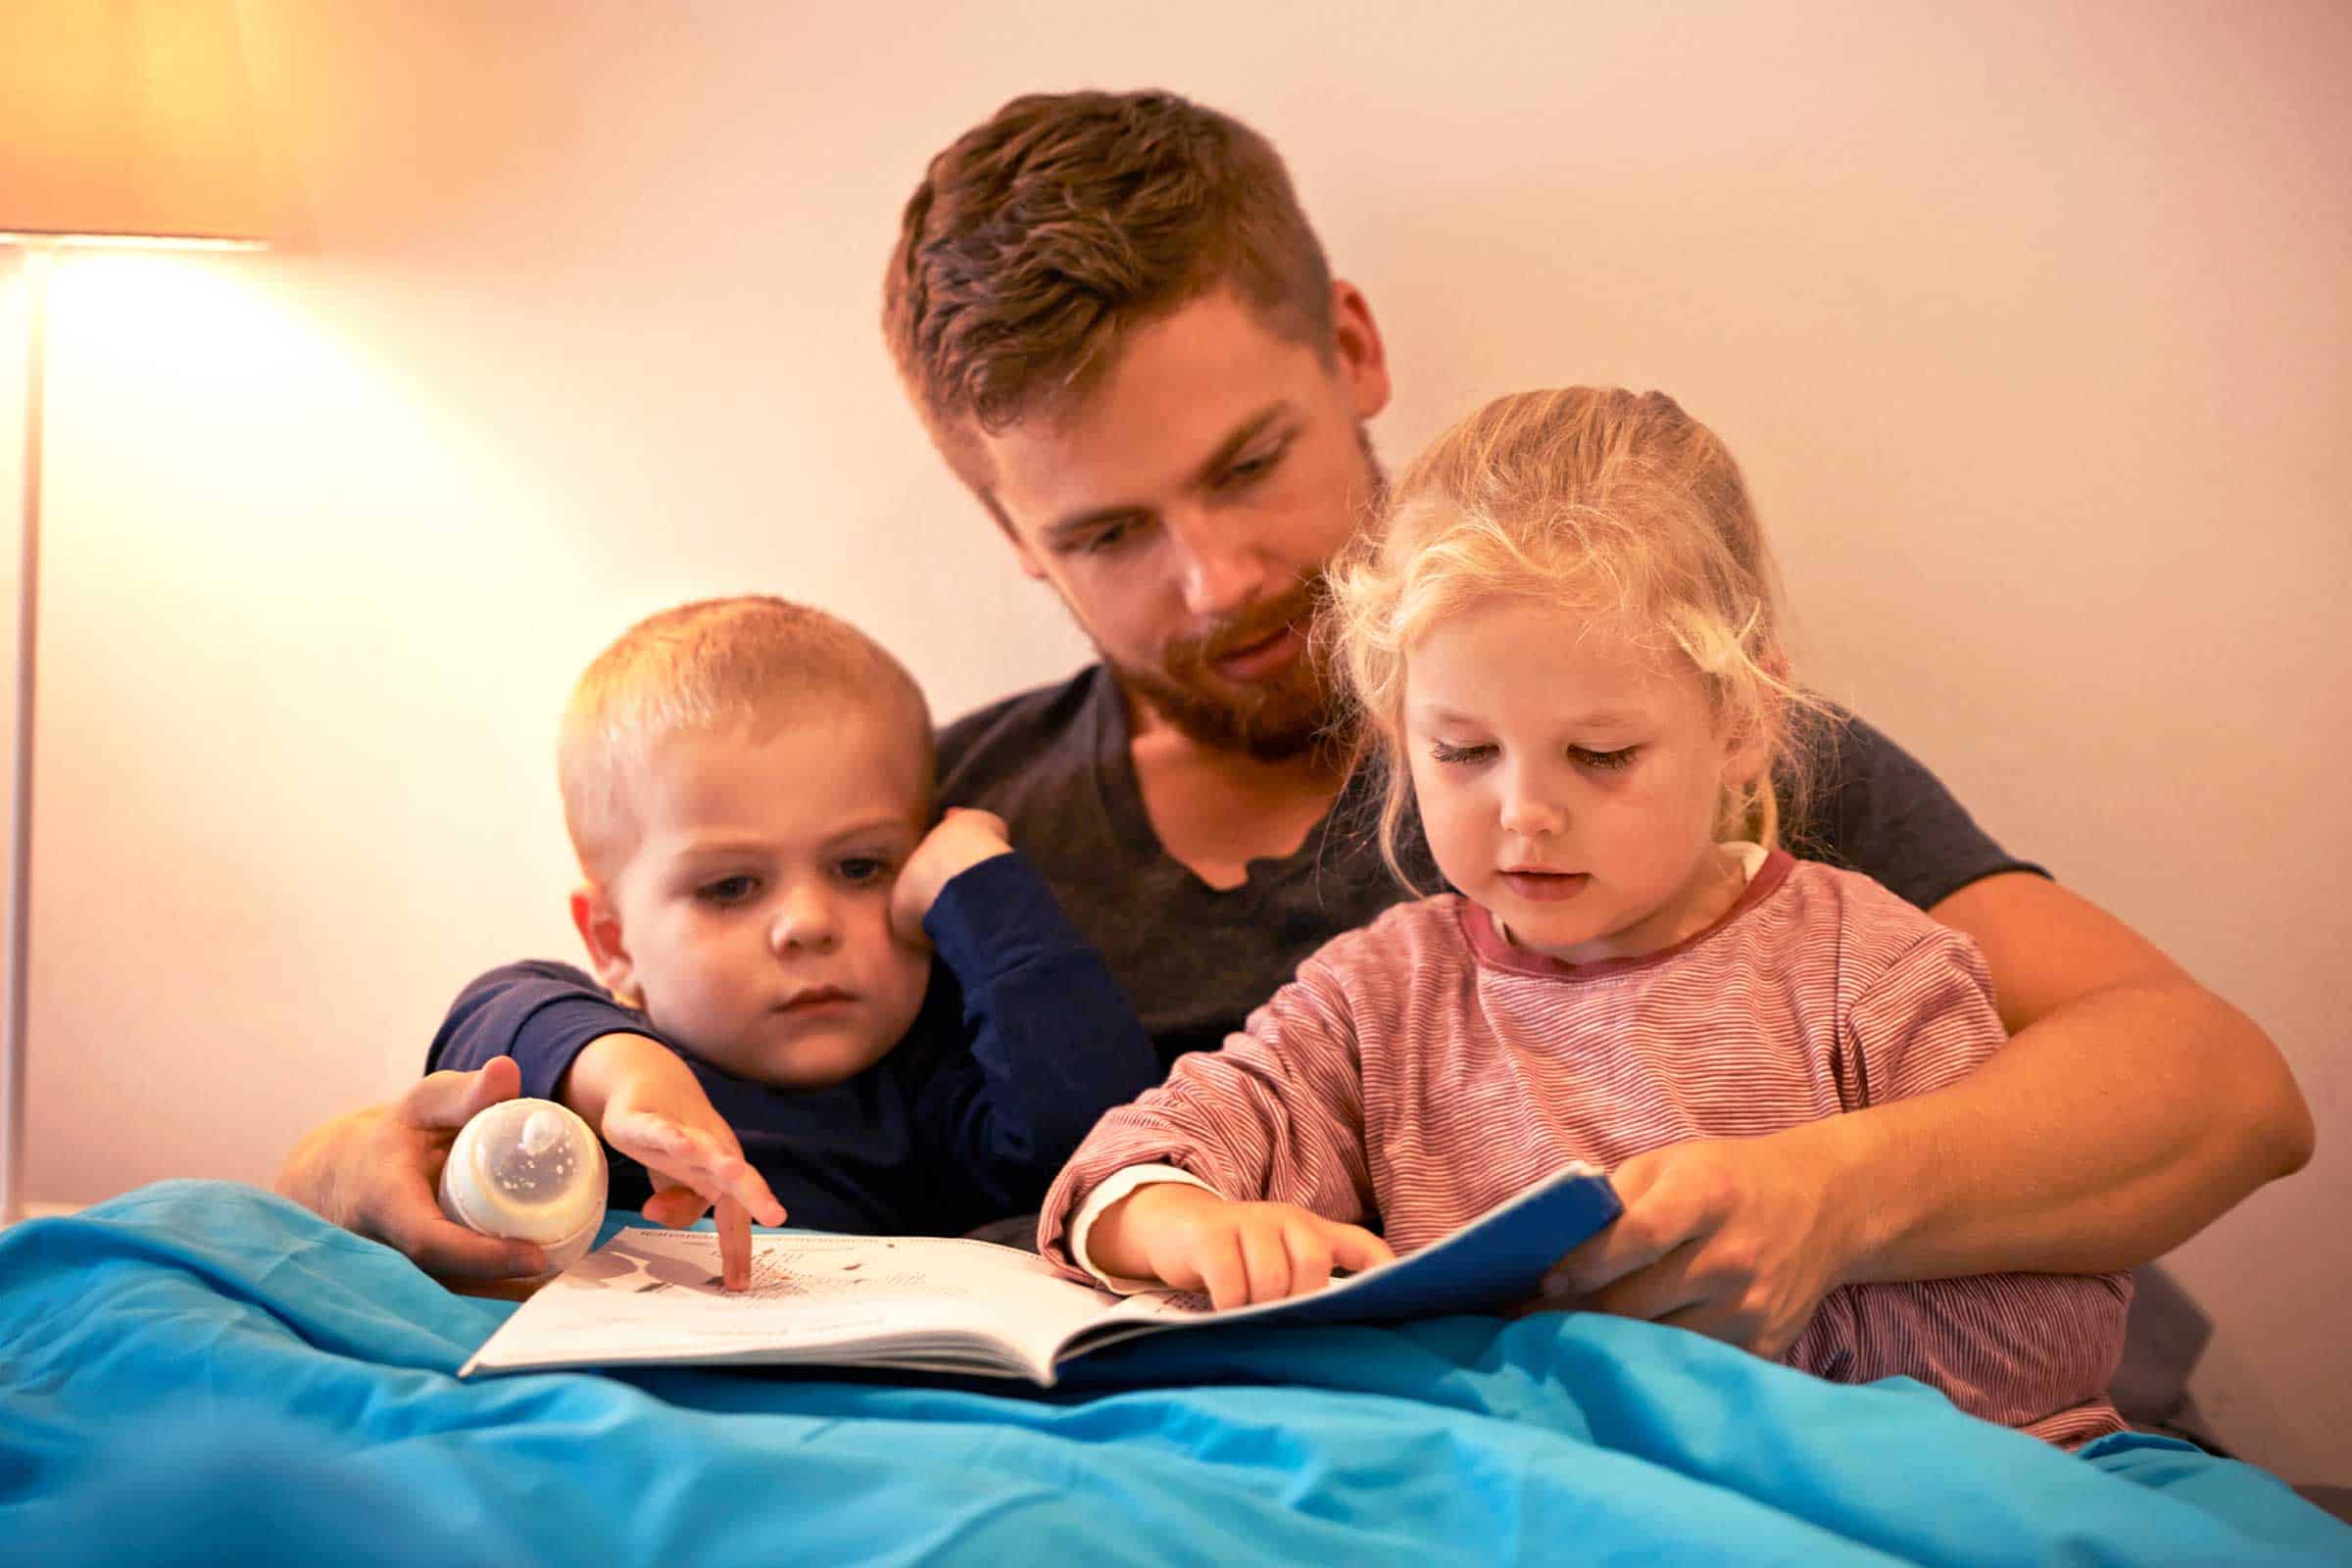 dad reading to his 2 young kids